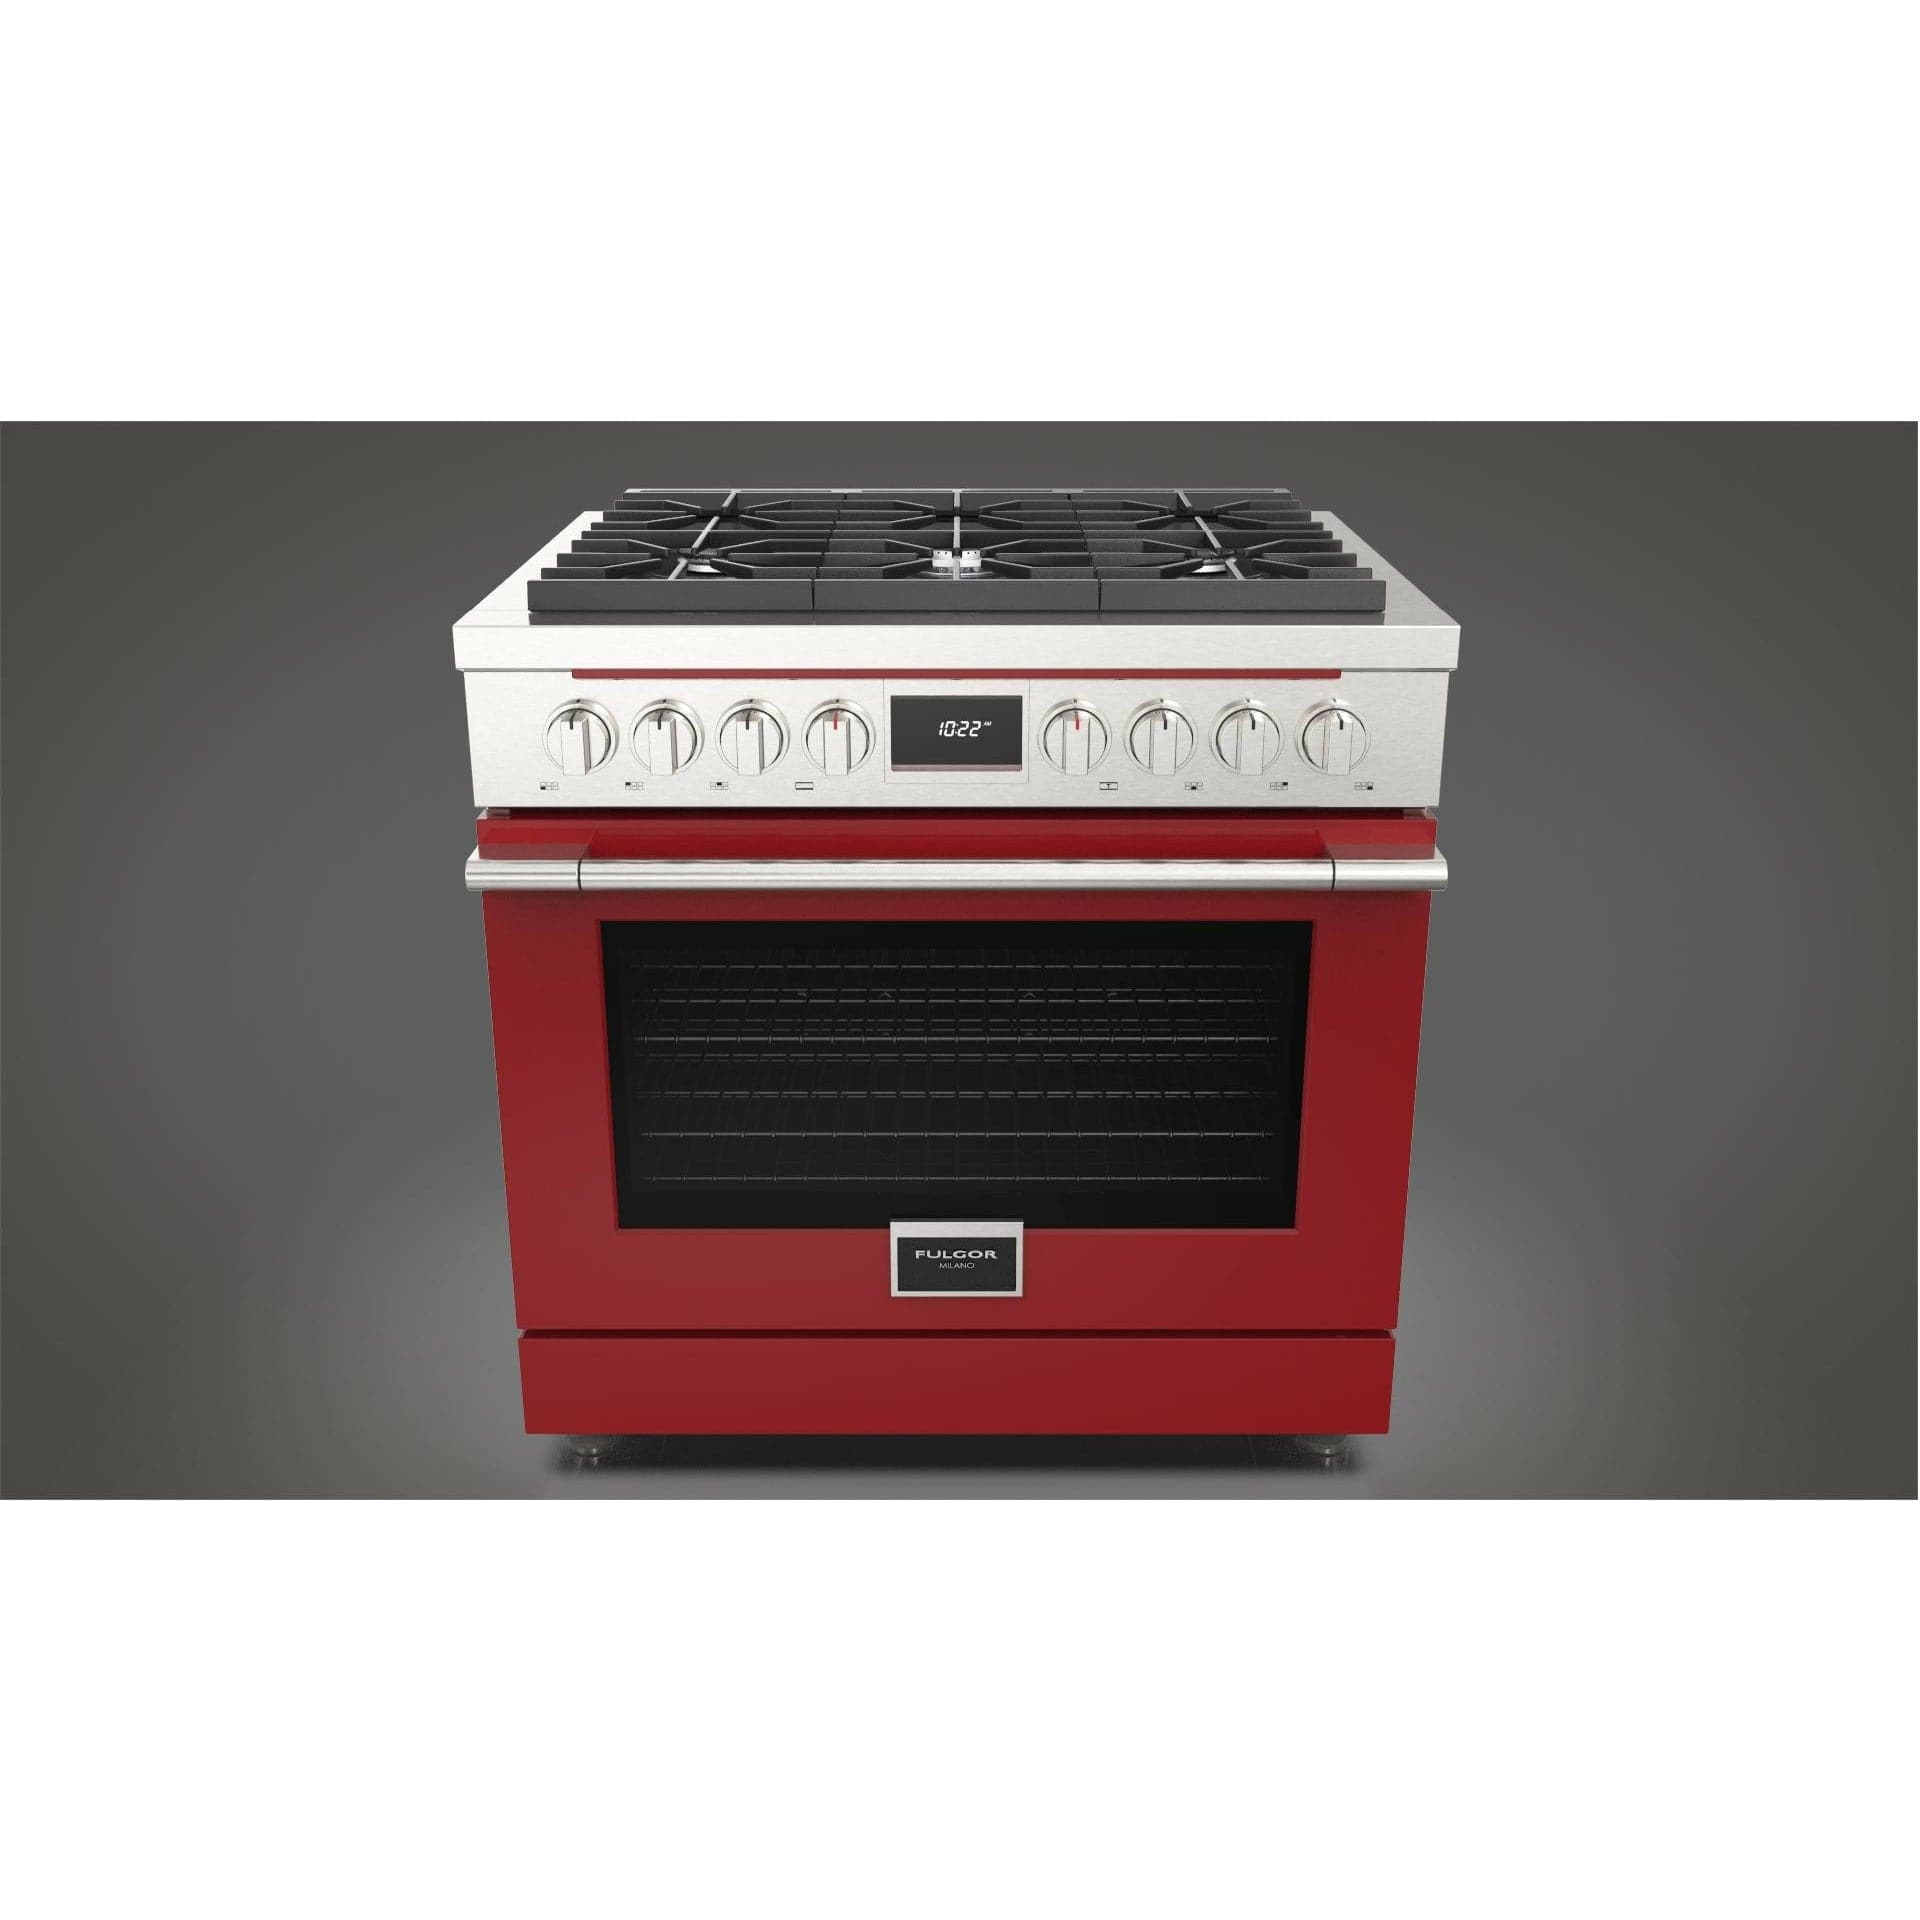 Fulgor Milano 36" Pro-Style Dual Fuel Range with 5.7 Cu. Ft. Capacity, Stainless Steel - F4PDF366S1 Ranges ACDKIT36RD Luxury Appliances Direct